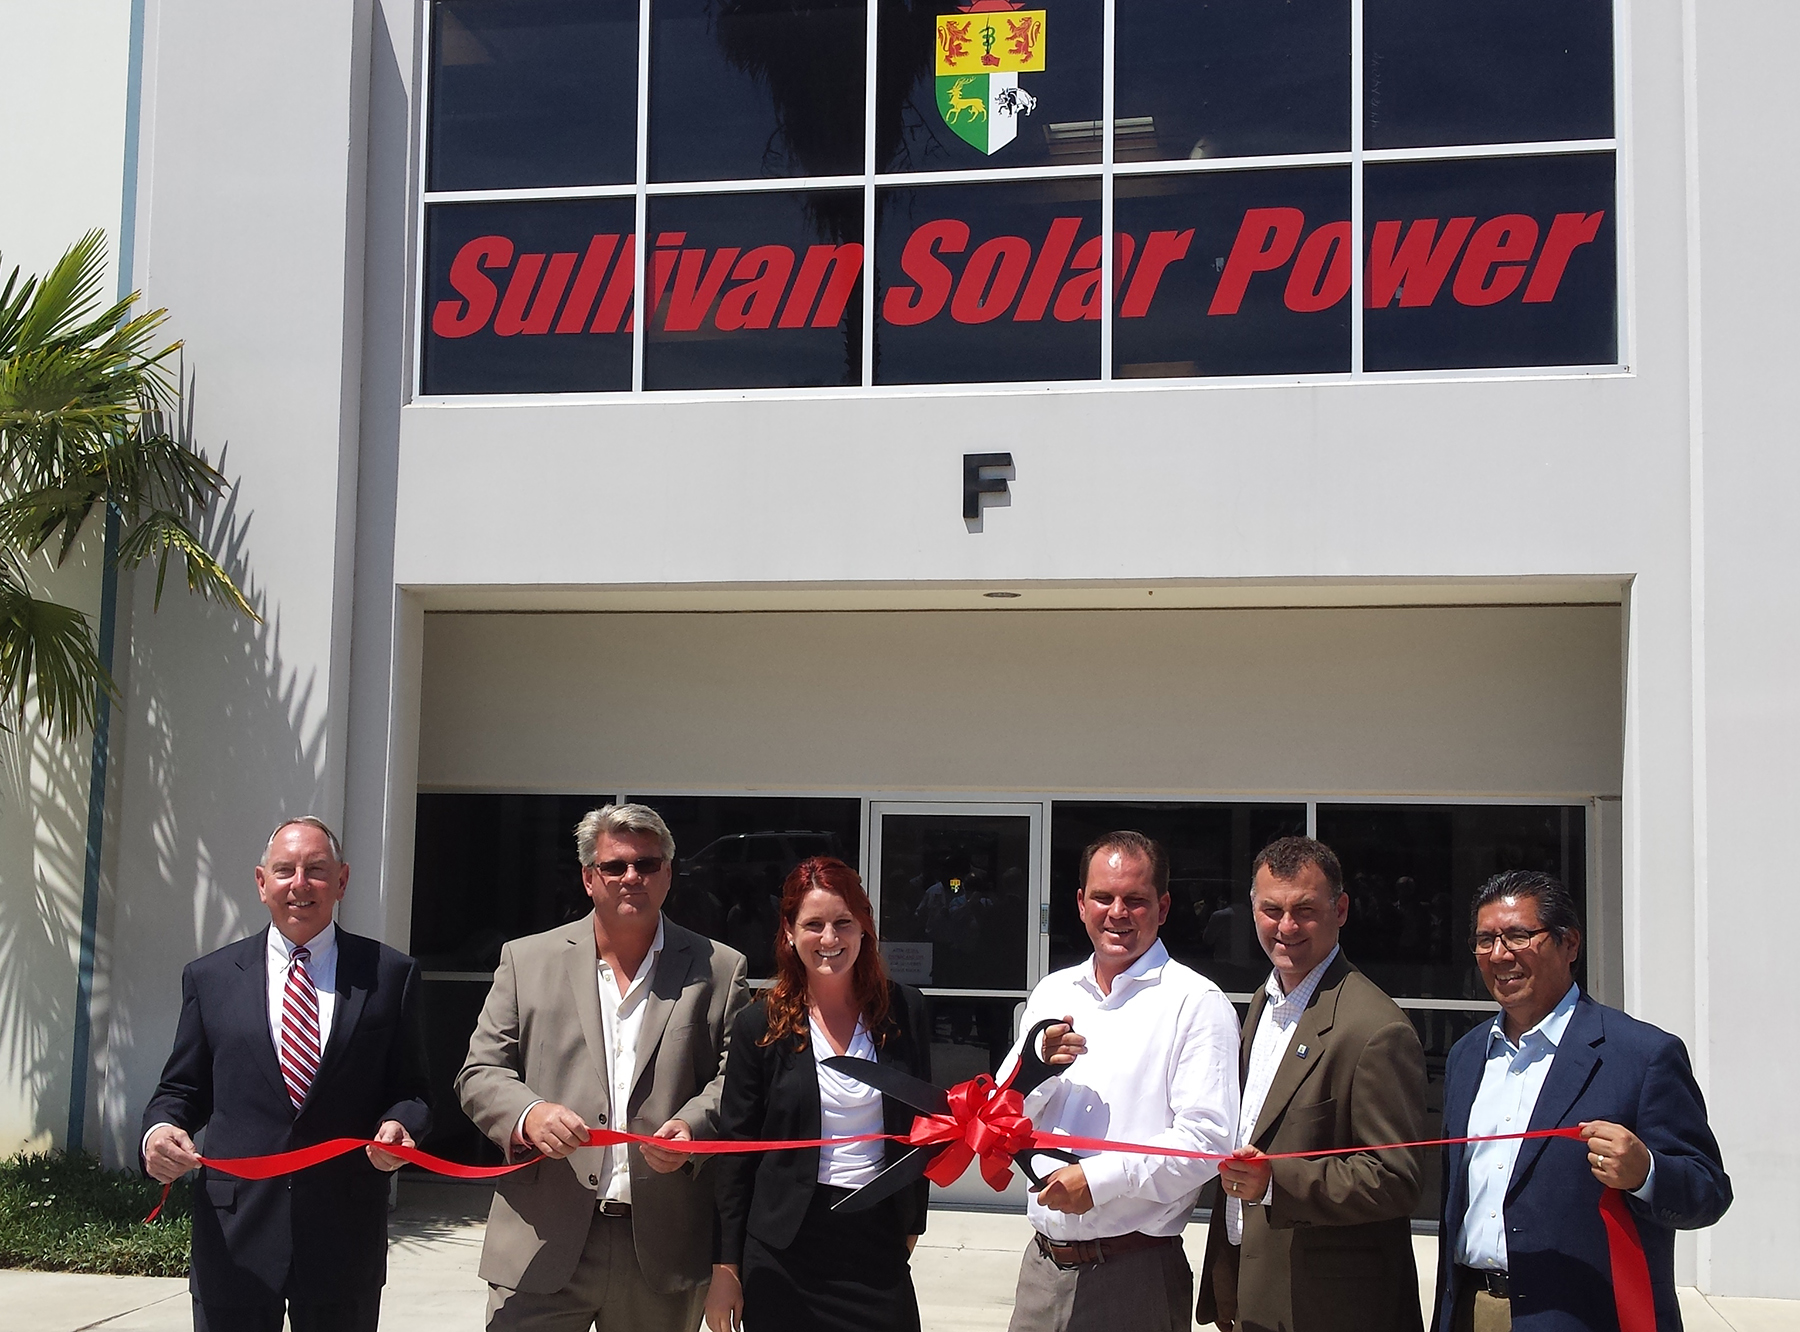 sullivan-solar-power-s-expansion-in-riverside-county-brings-new-local